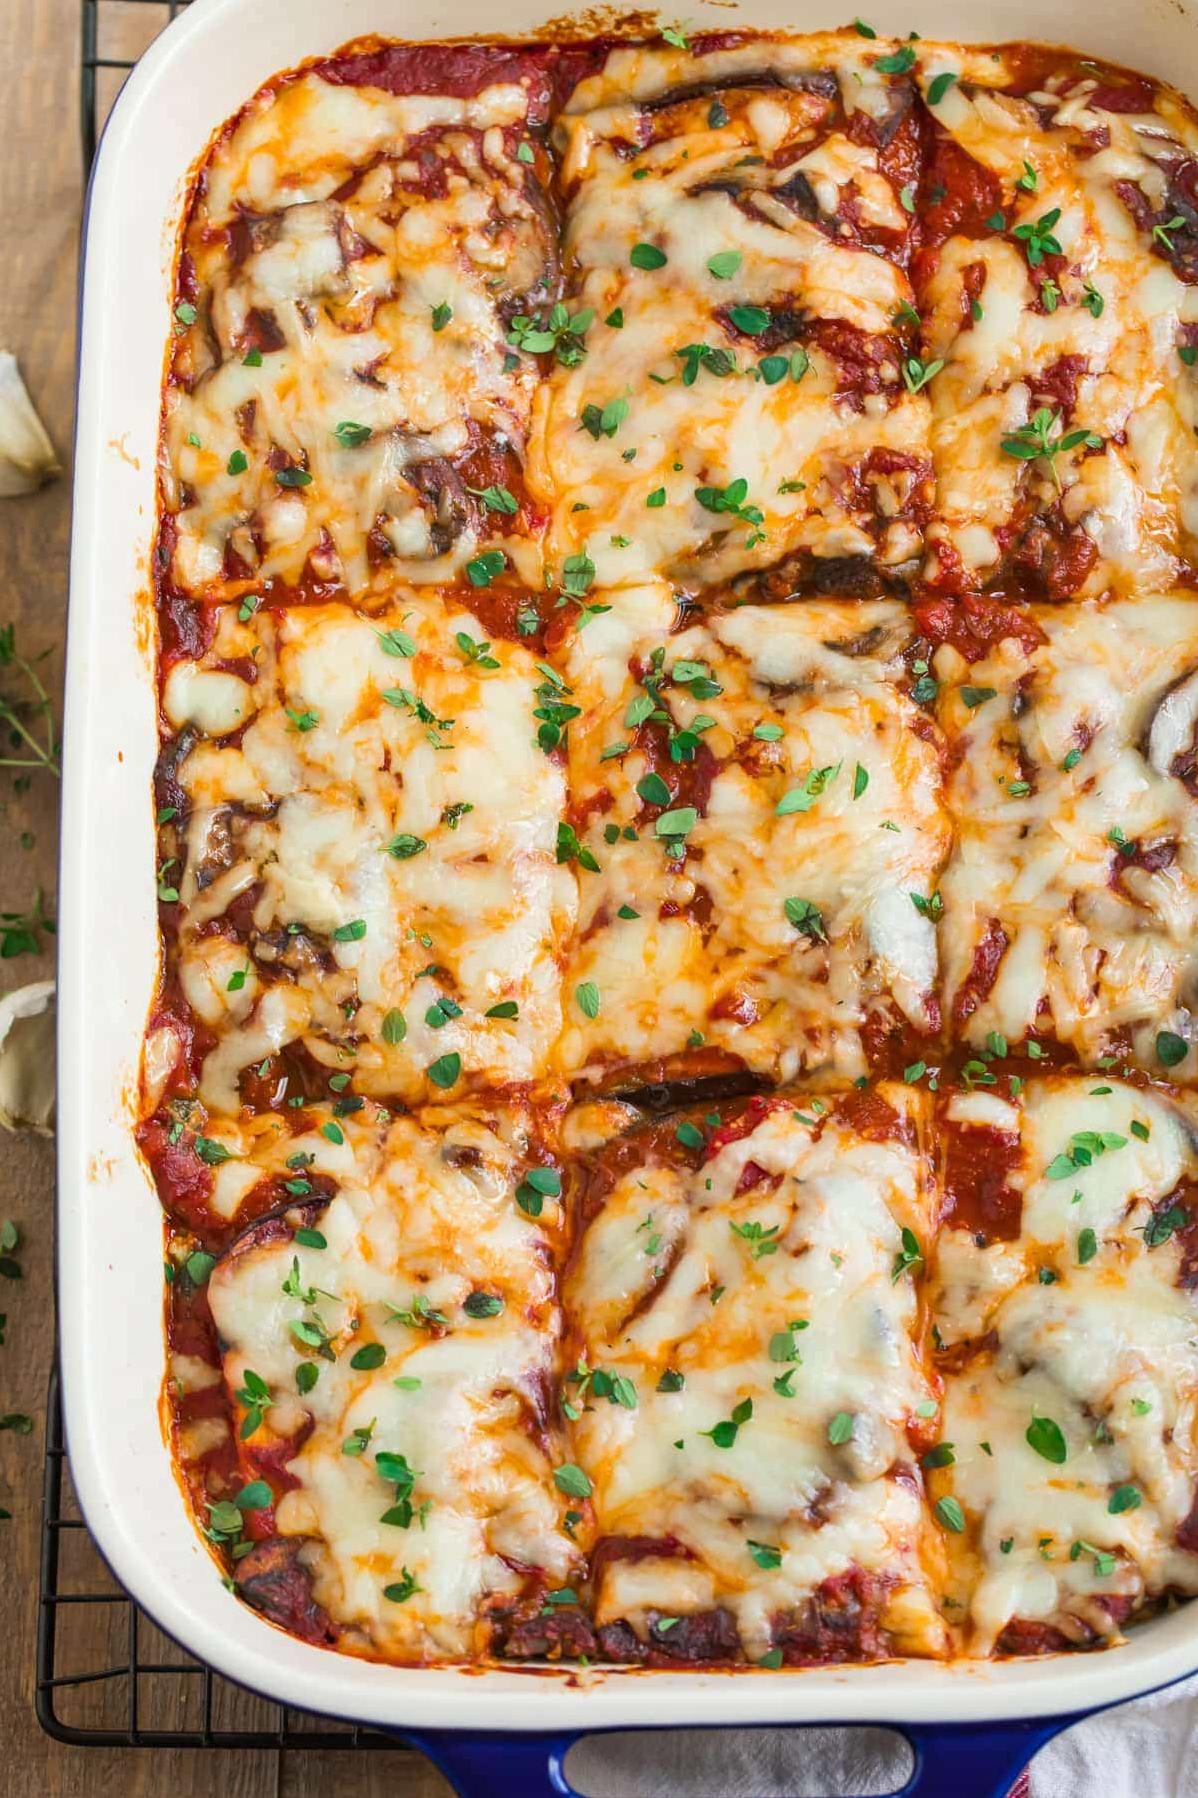  The perfect excuse to eat lasagna for breakfast